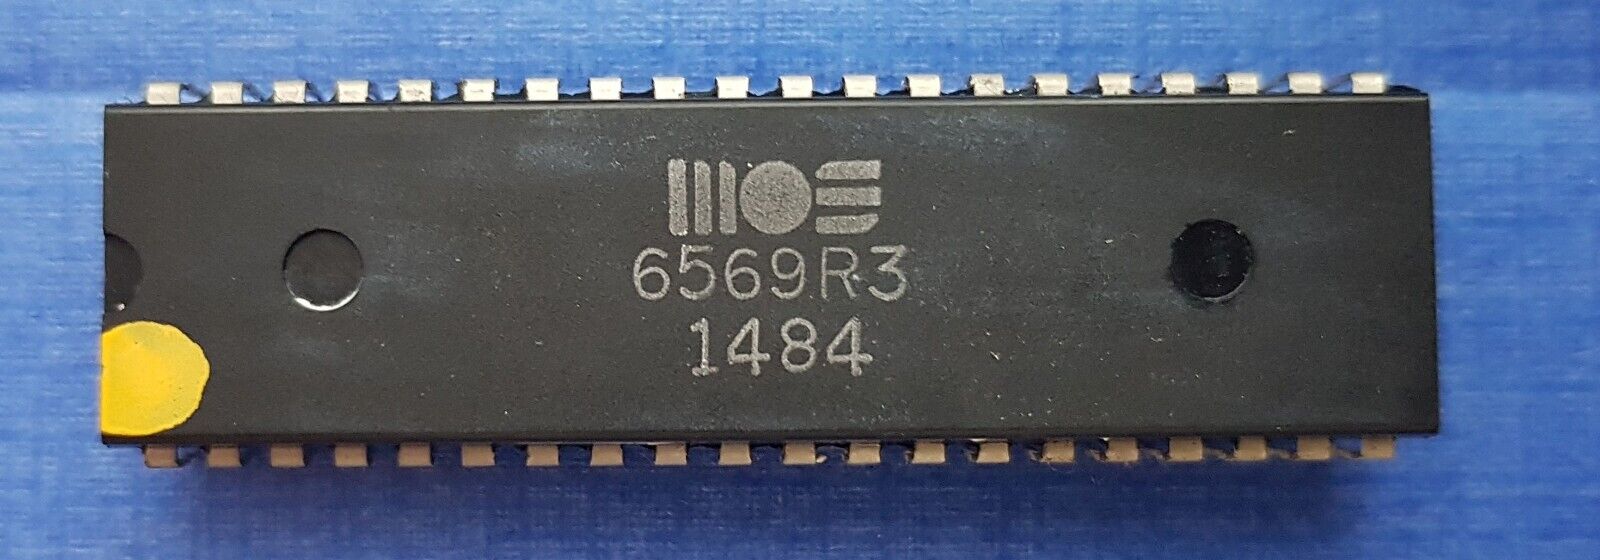 MOS 6569R3 | MOS 6569 R3 VIC II PAL Video Chip for Commodore 64 Genuine Part